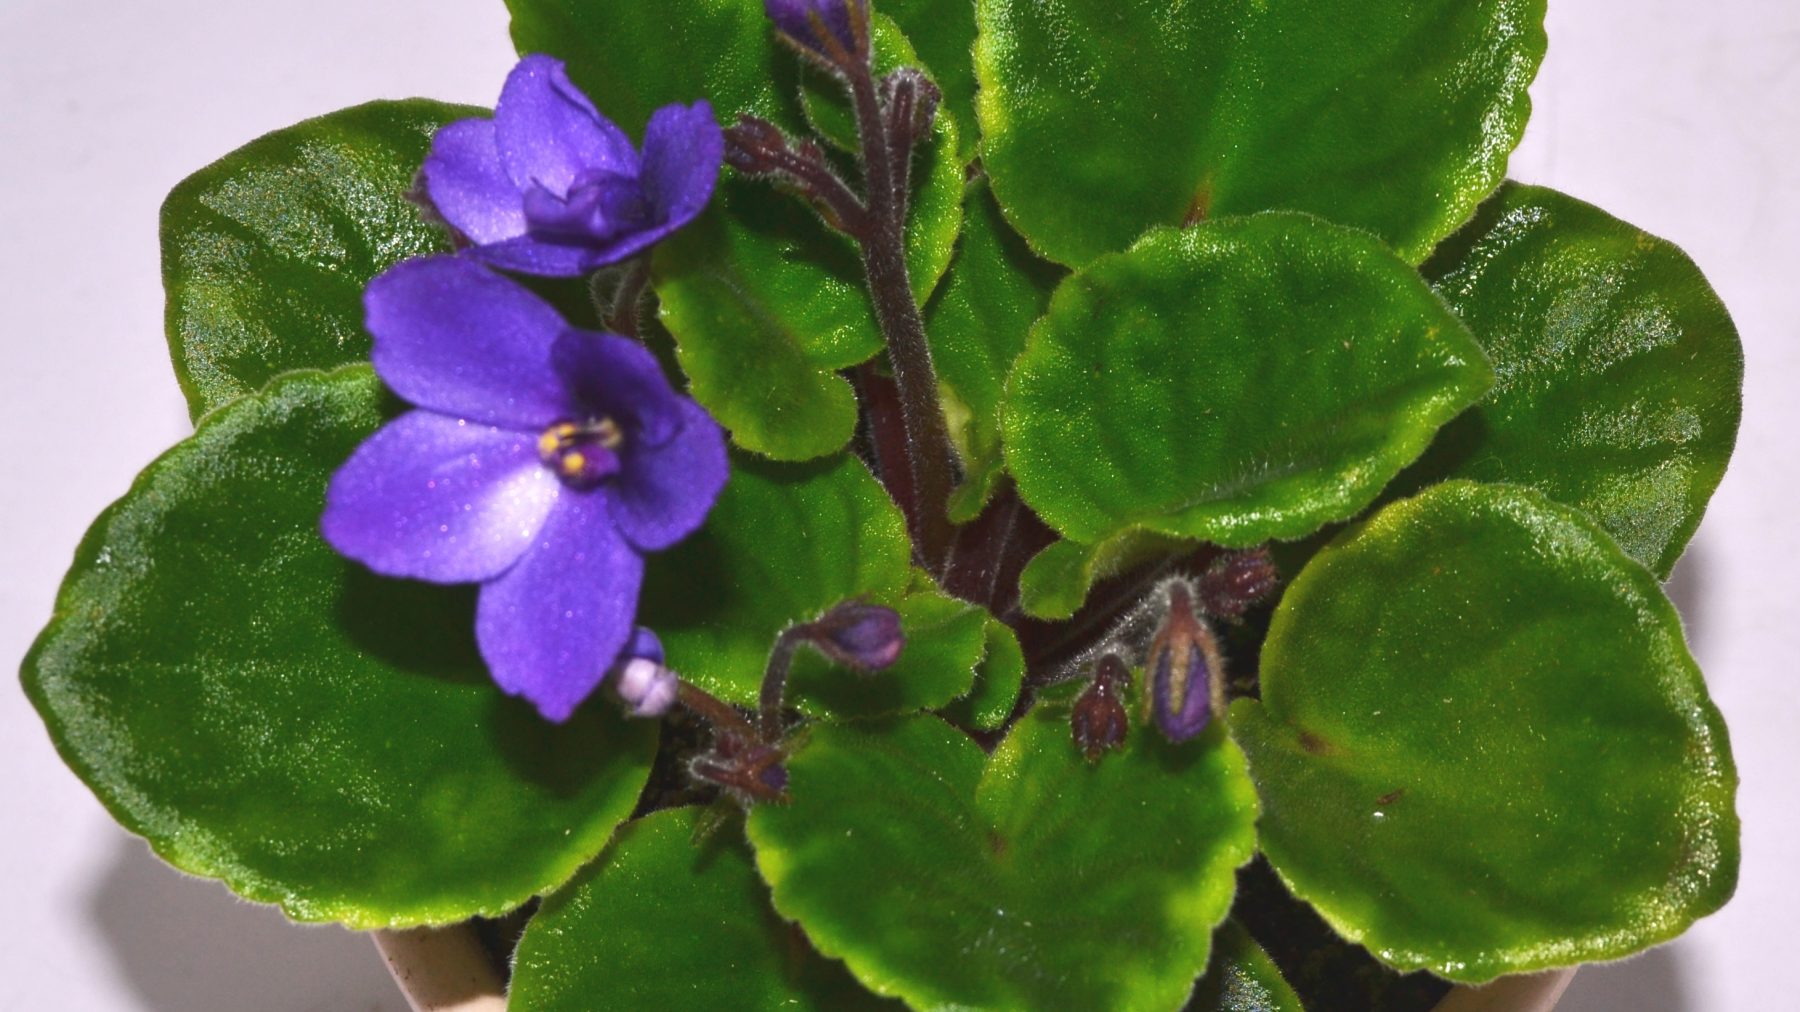 African Violet Show Plants How To Begin? Baby Violets